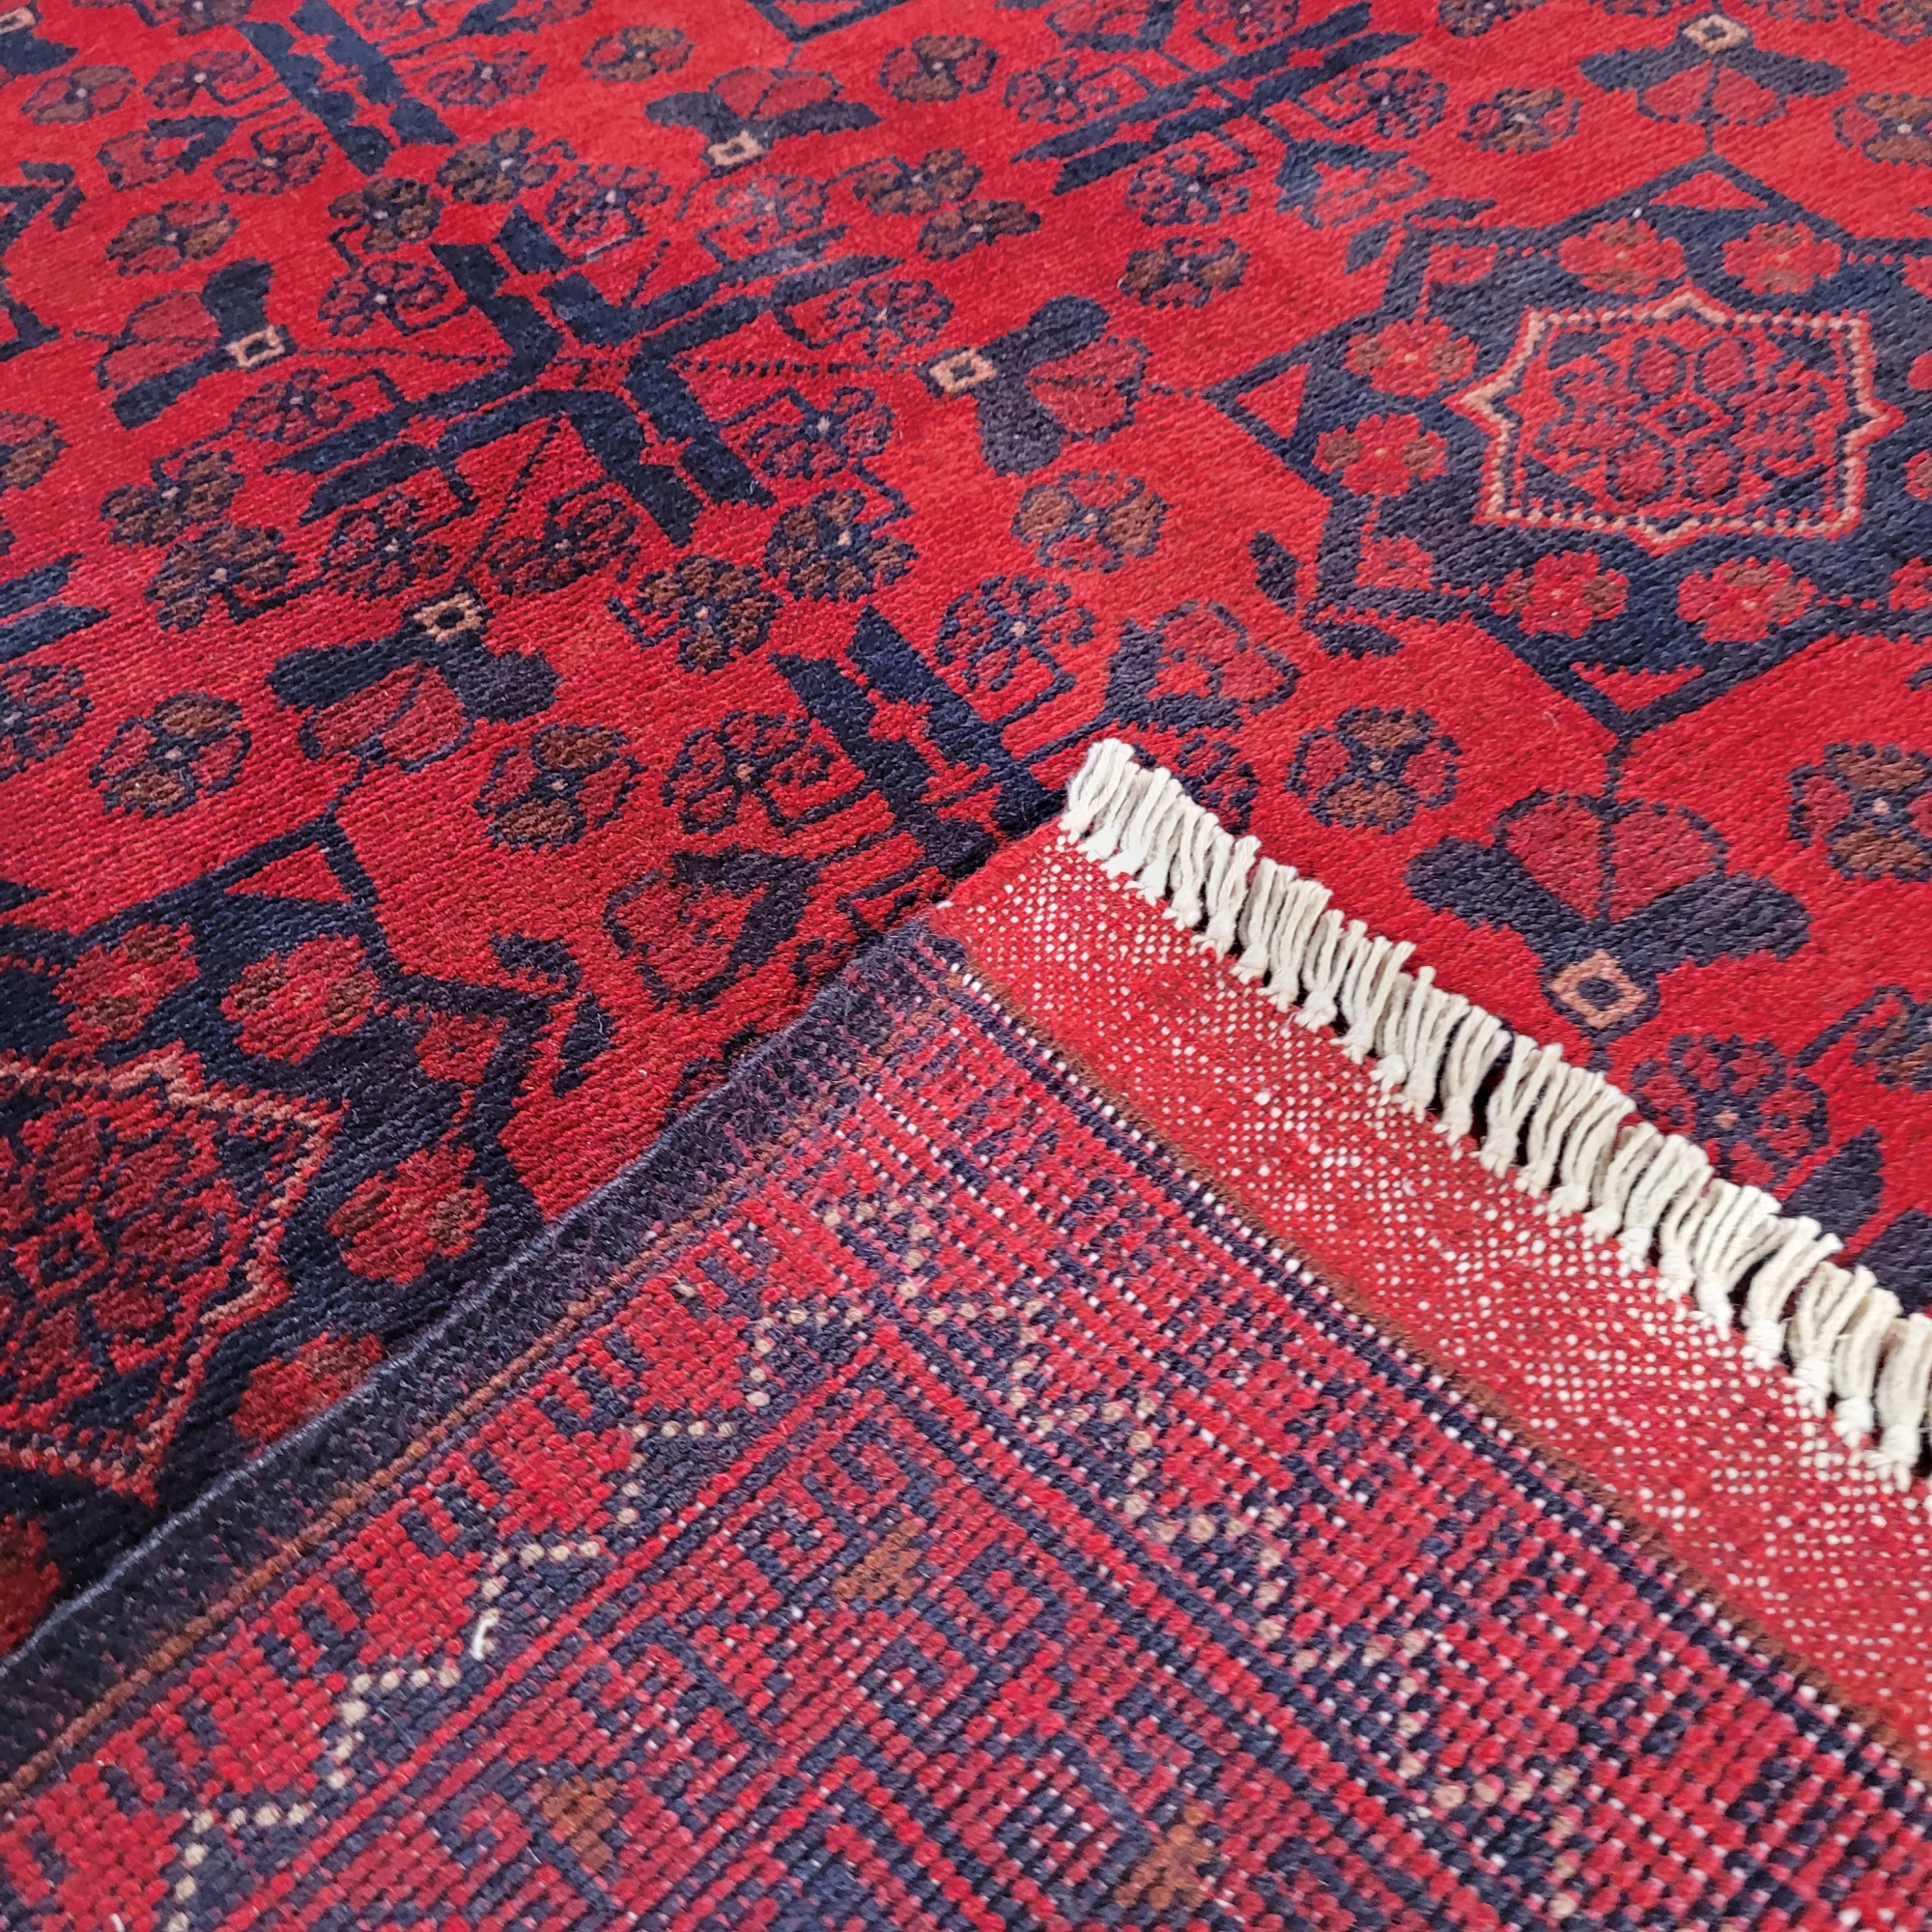 Khal Mohammadi Hand Knotted Rug 4'3